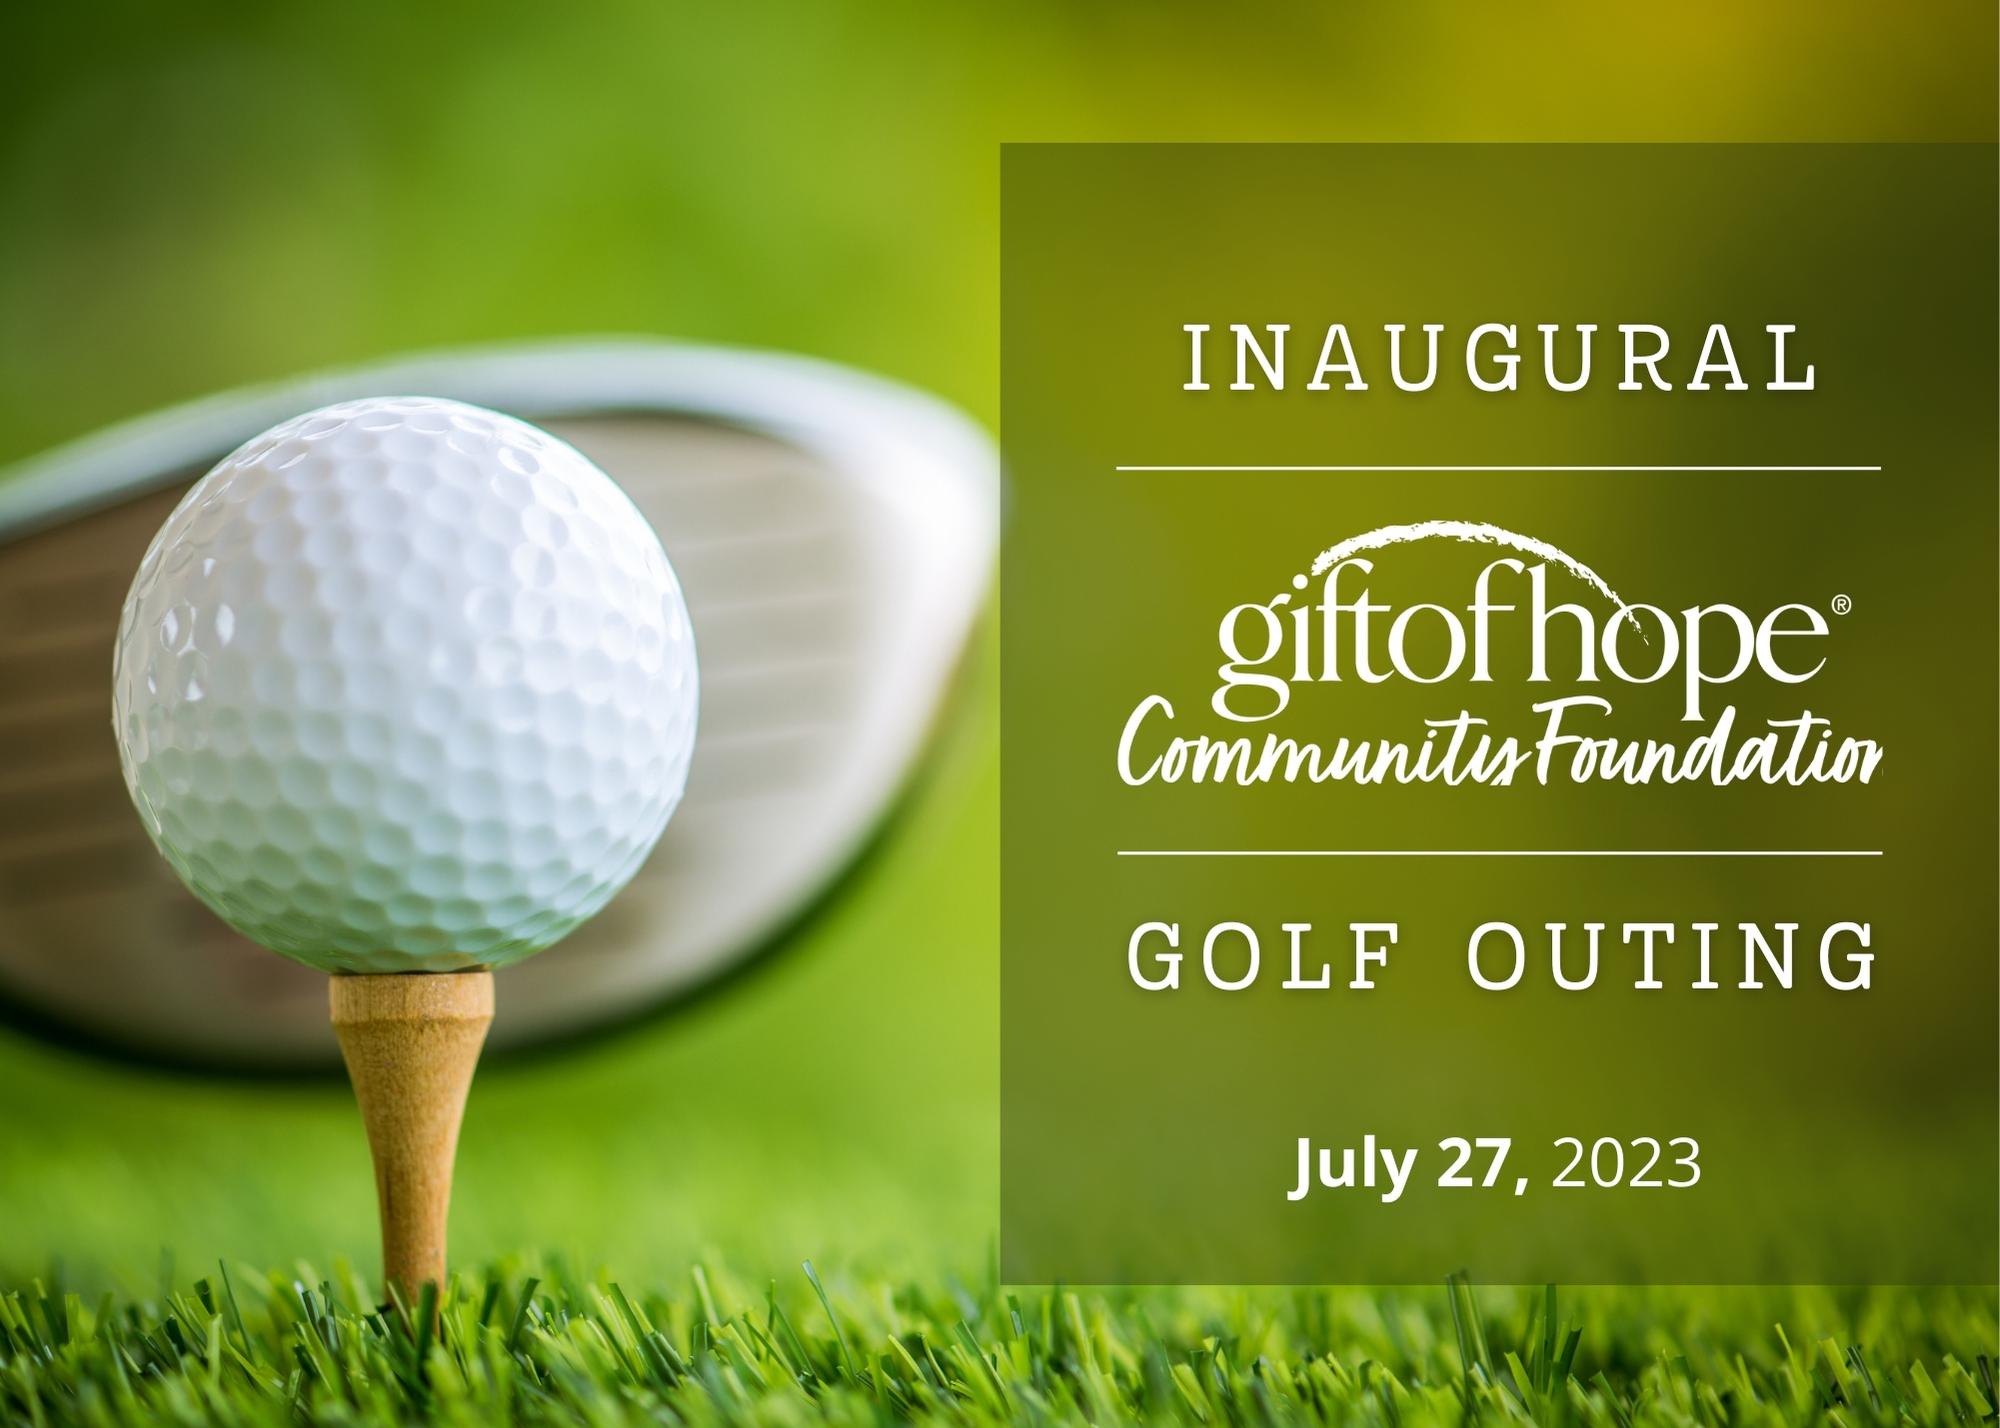 The Gift of Hope Community Foundation Golf Outing